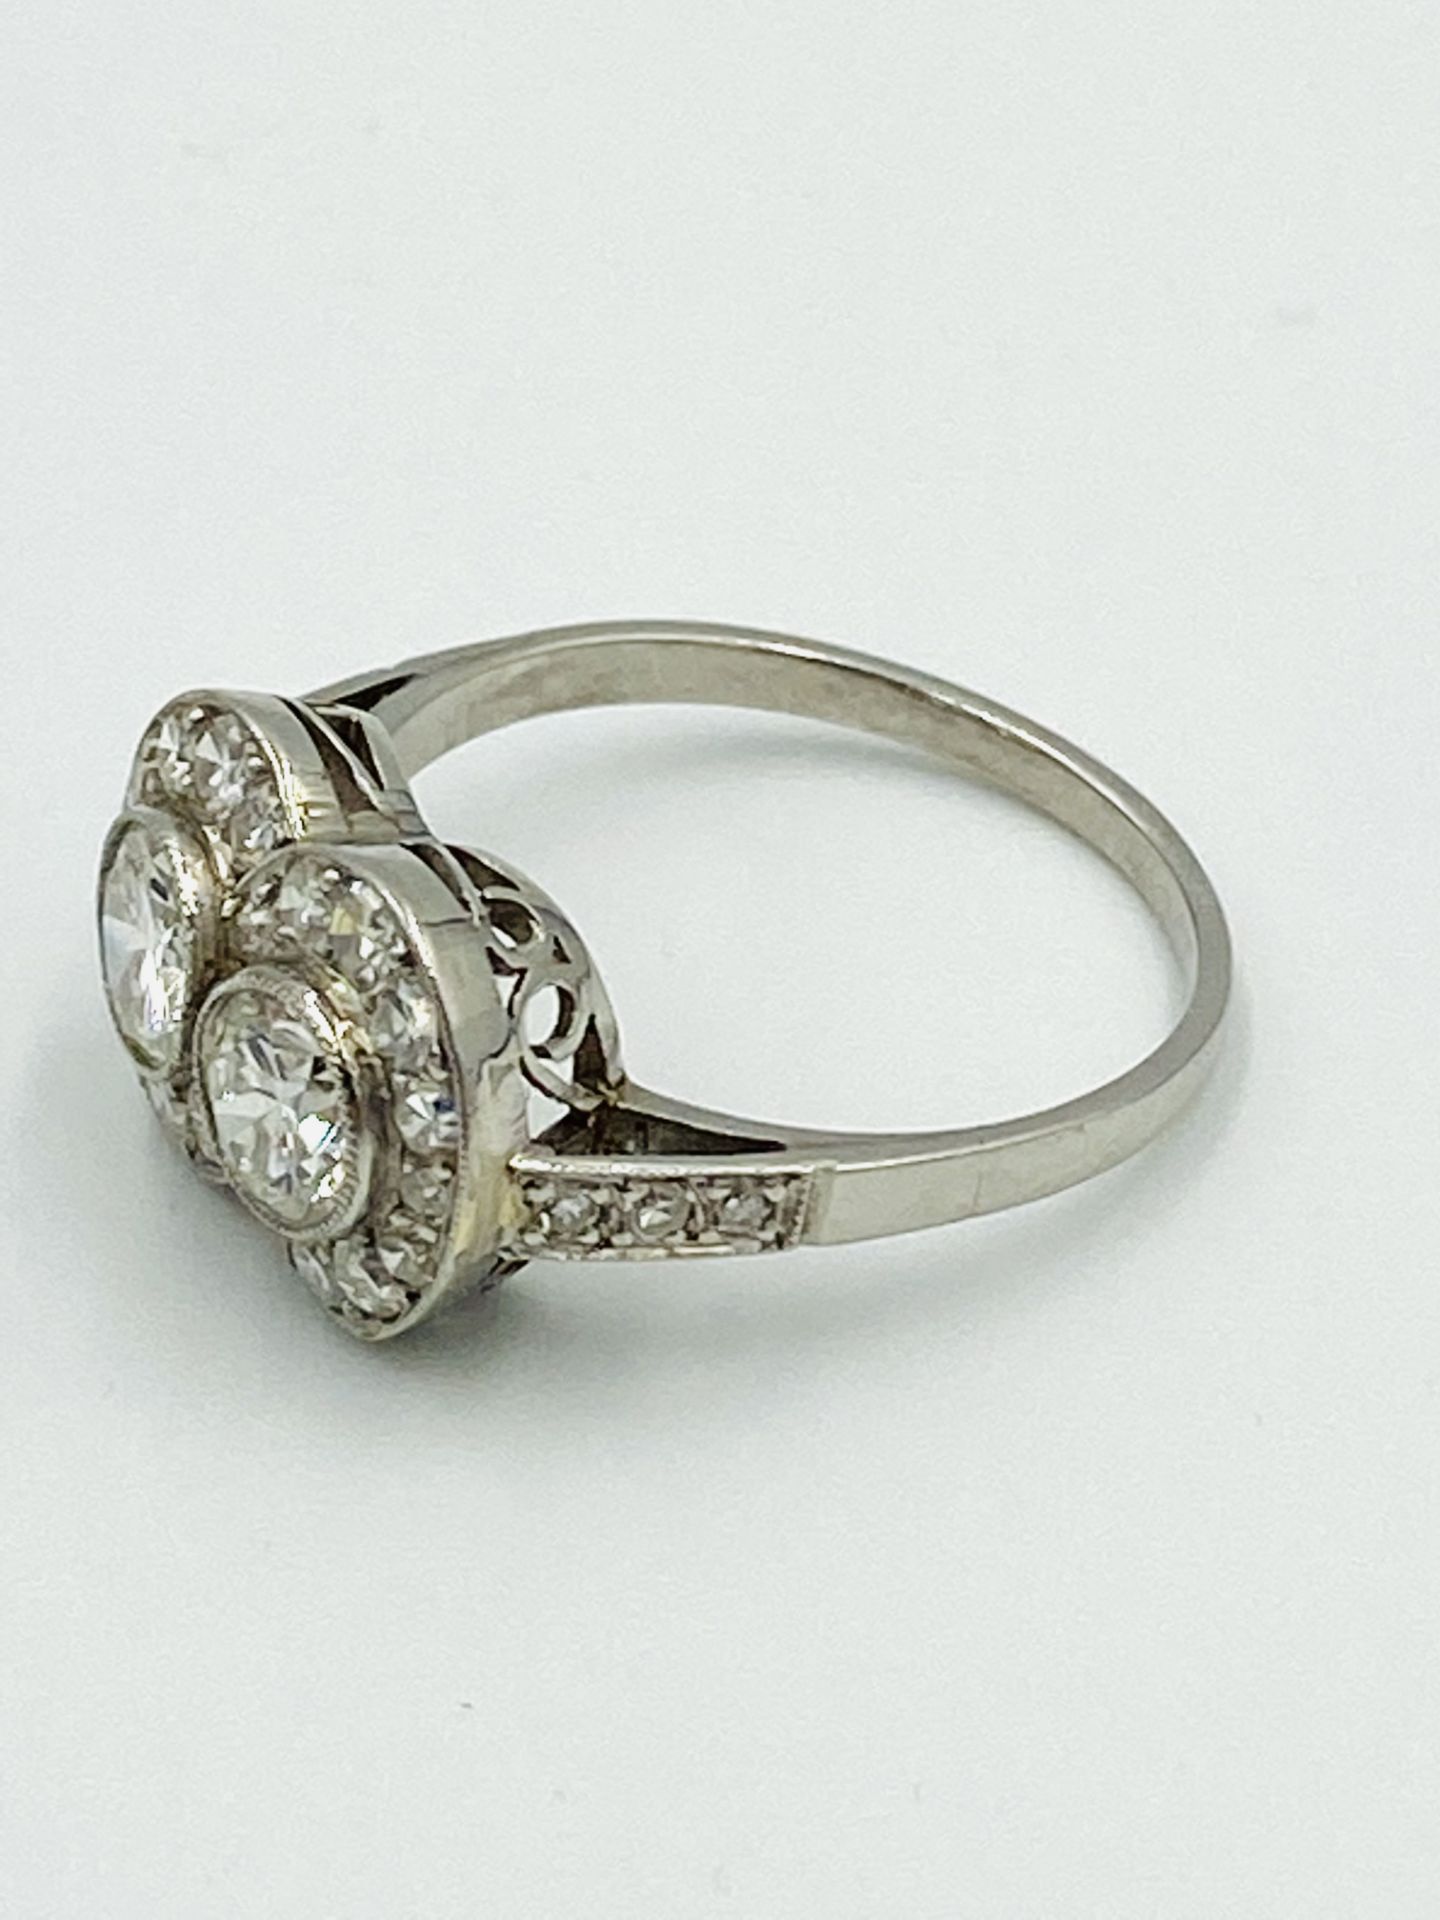 18ct white gold and diamond ring - Image 2 of 4